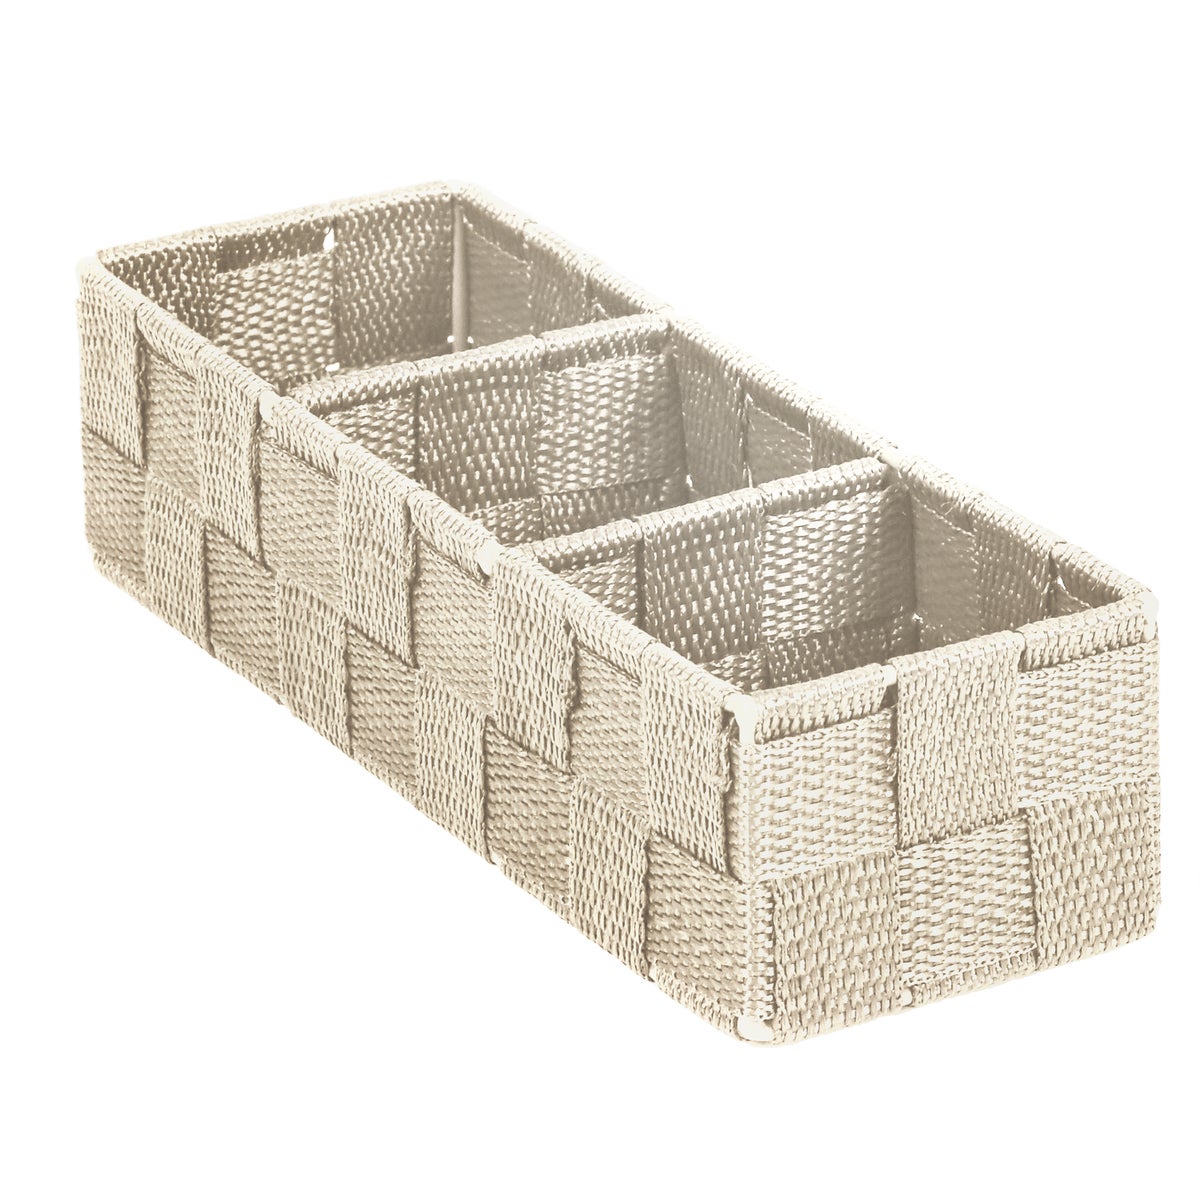 Home Impressions 3.25 In. W. x 2.25 In. H. x 9.5 In. L. Woven Storage Tray, Beige